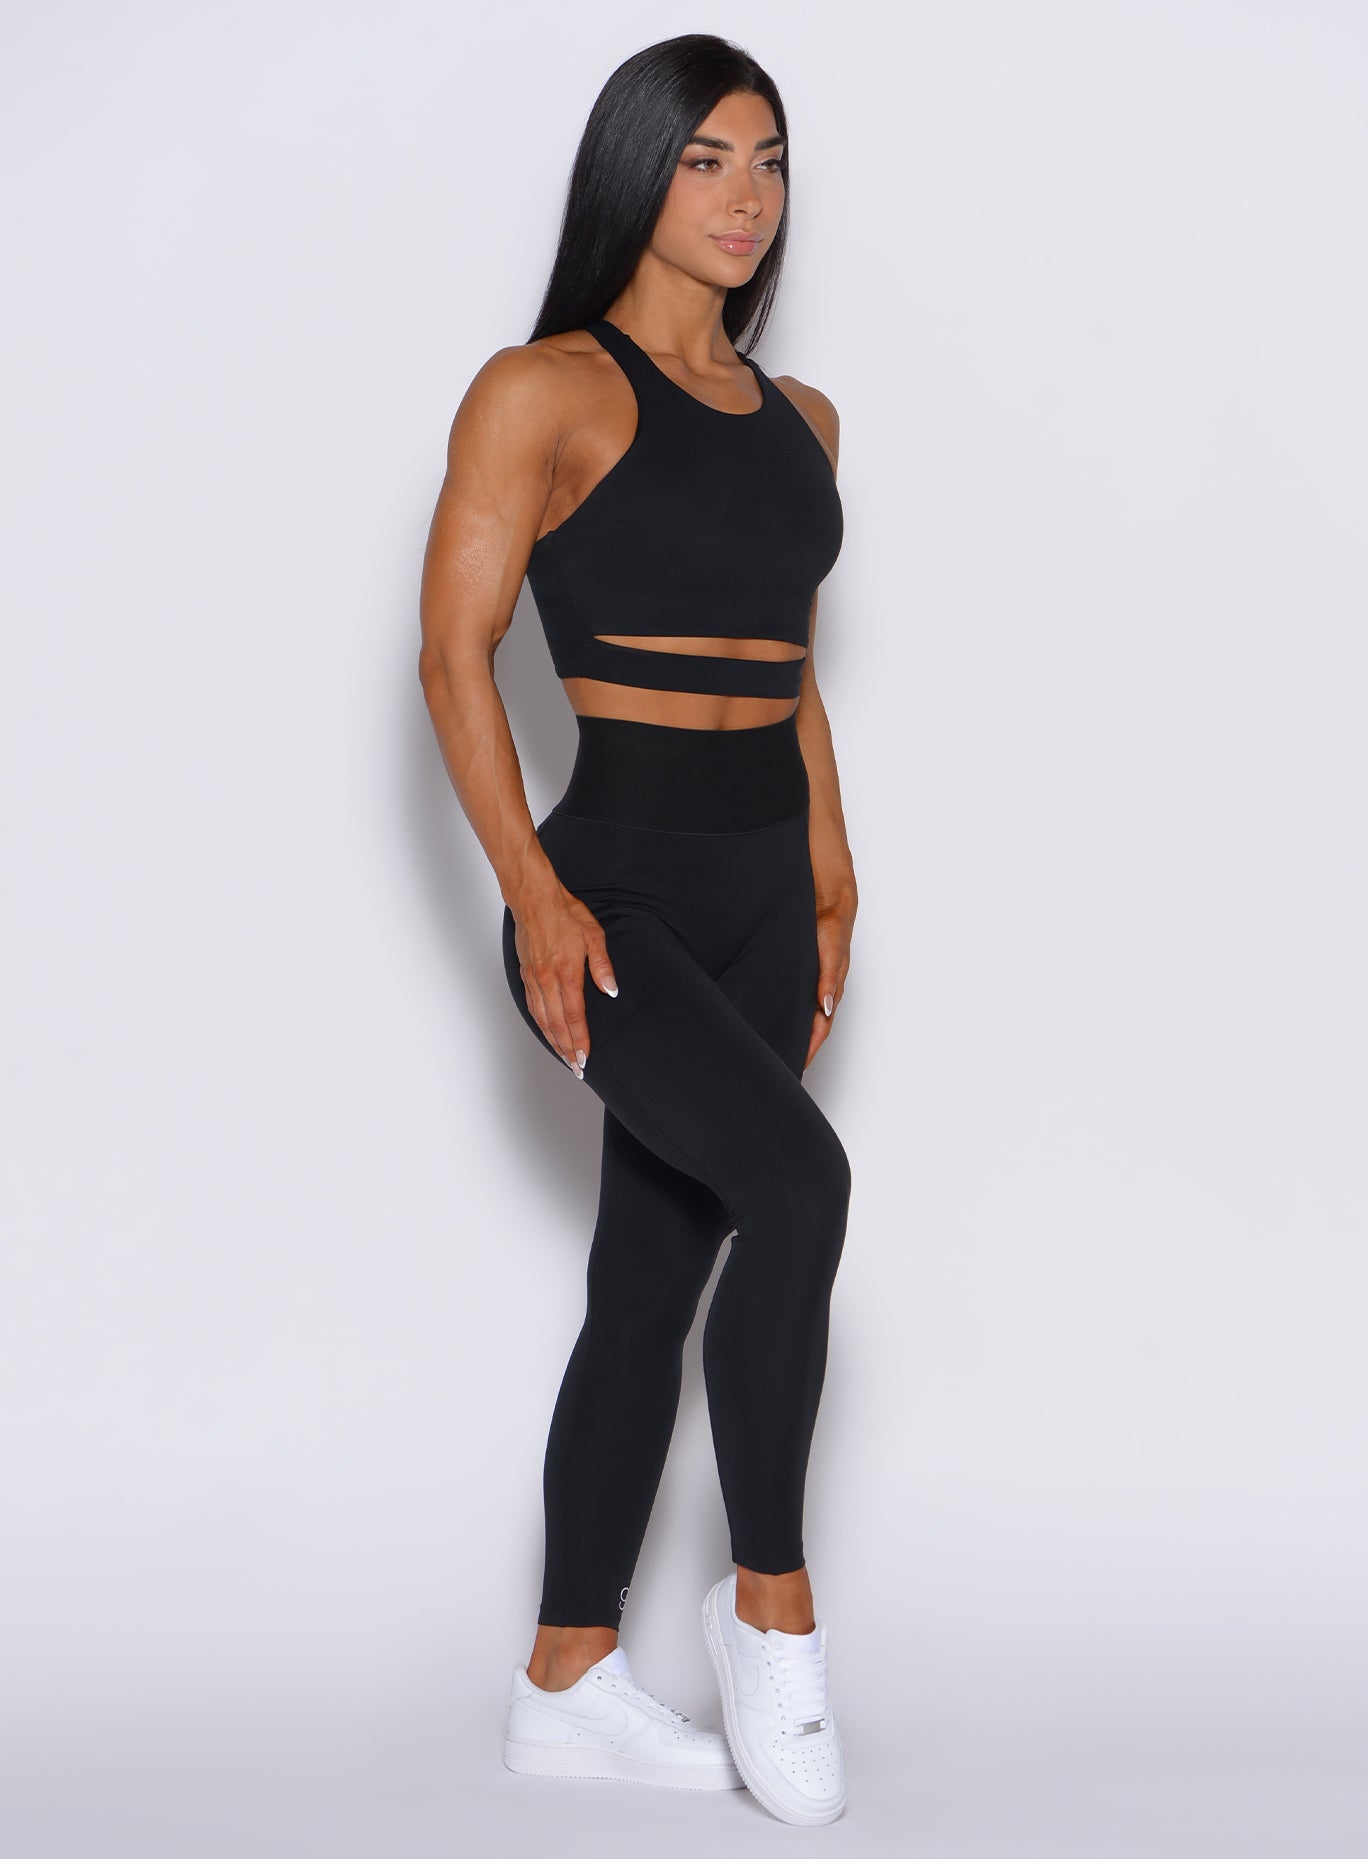 Right side profile view of a model wearing our black cincher leggings and a matching top